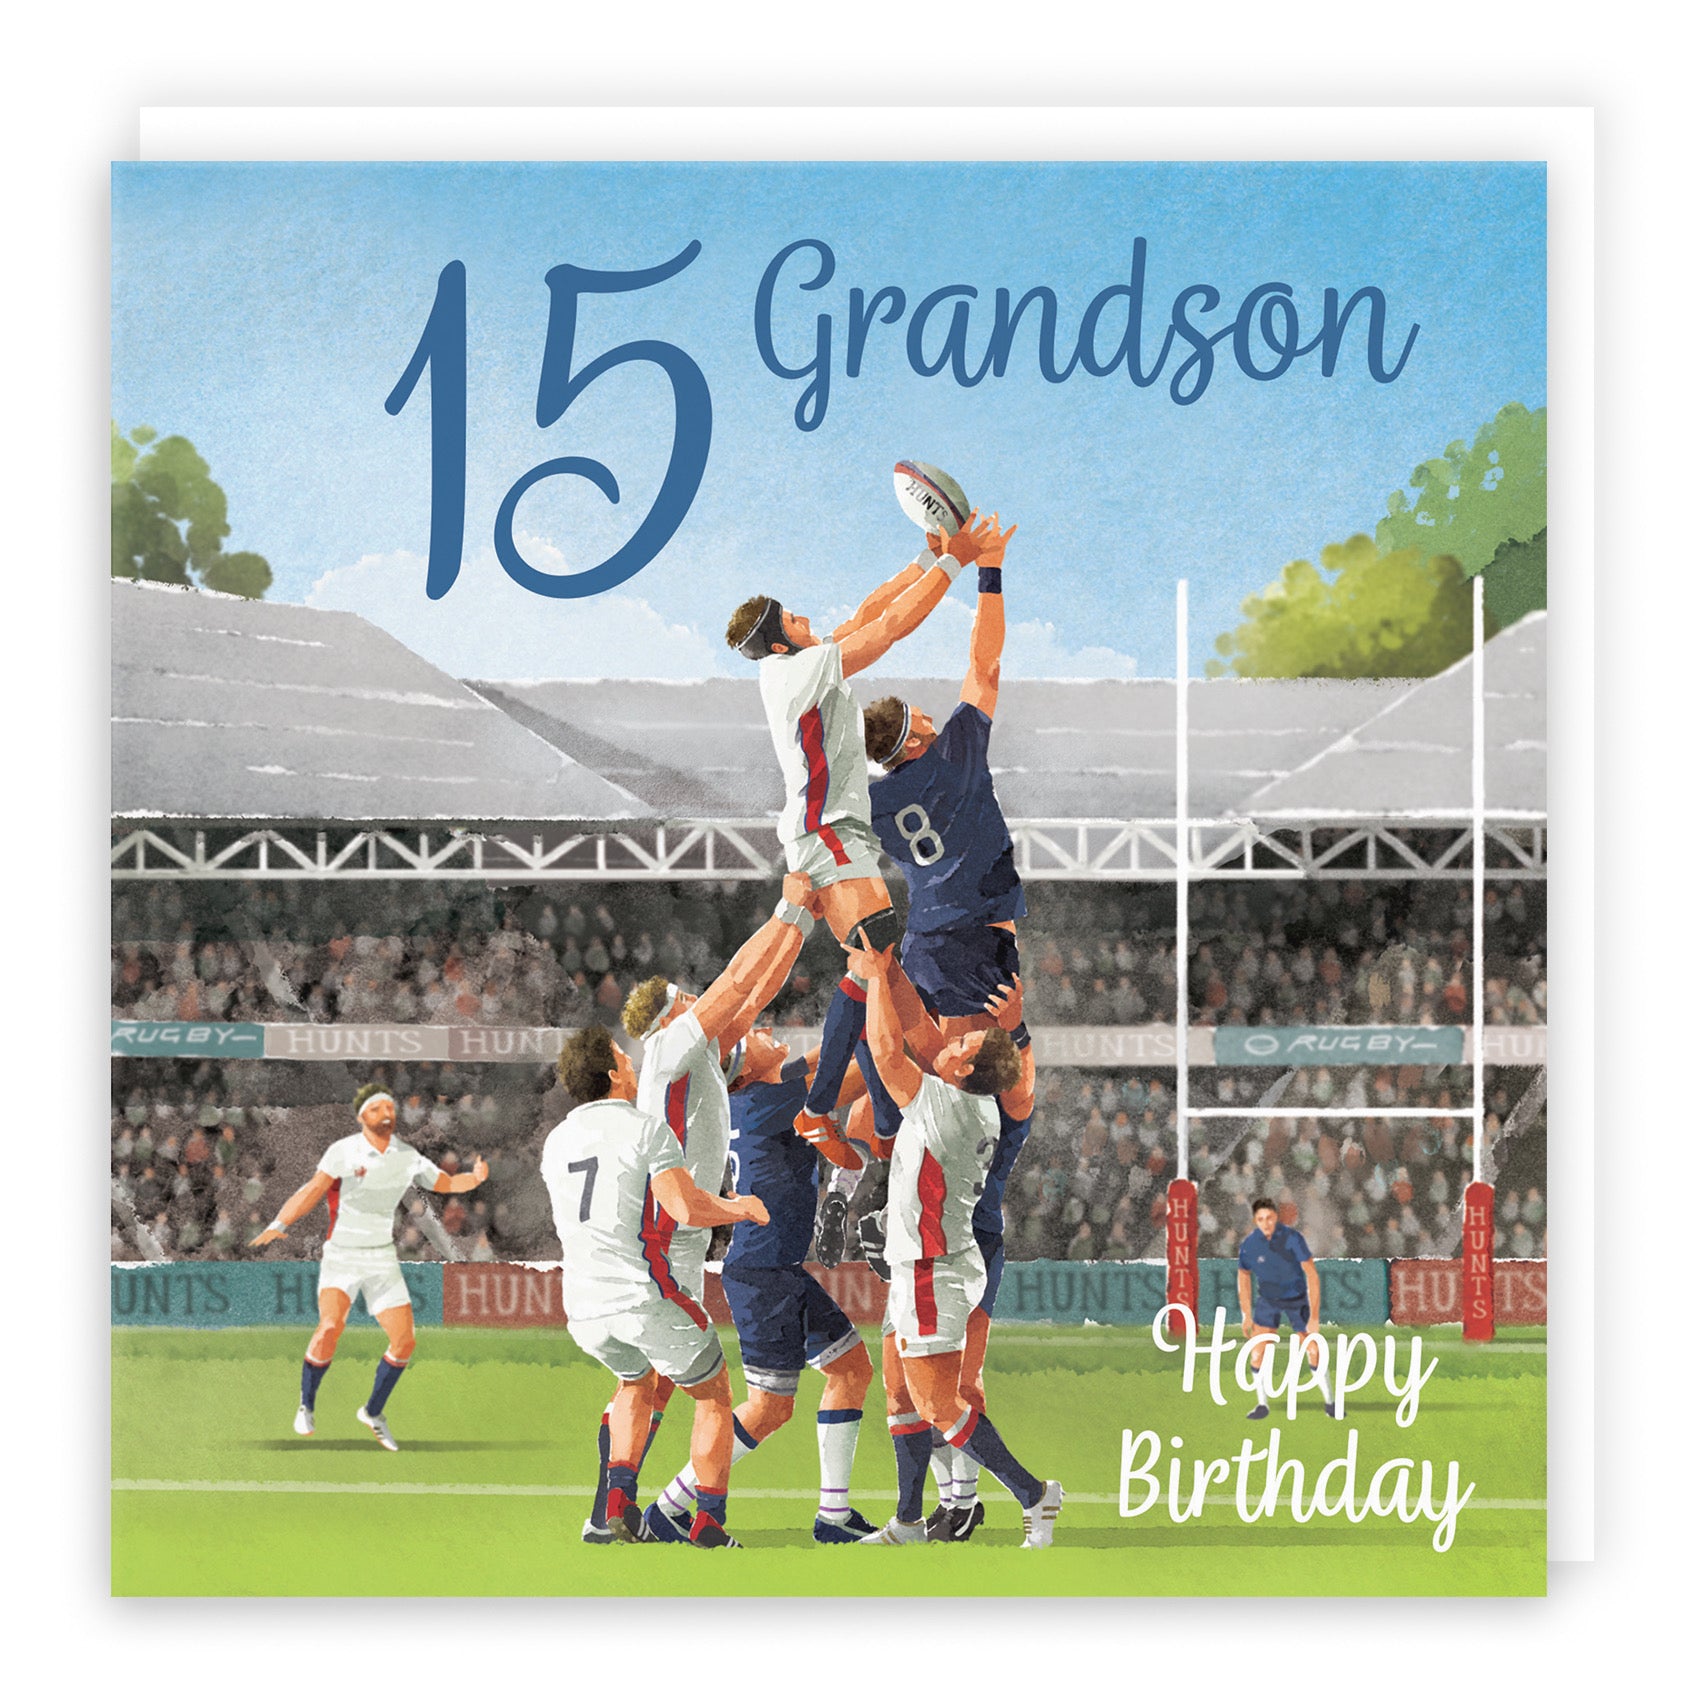 15th Grandson Rugby Birthday Card Milo's Gallery - Default Title (B0CPQYVNMT)